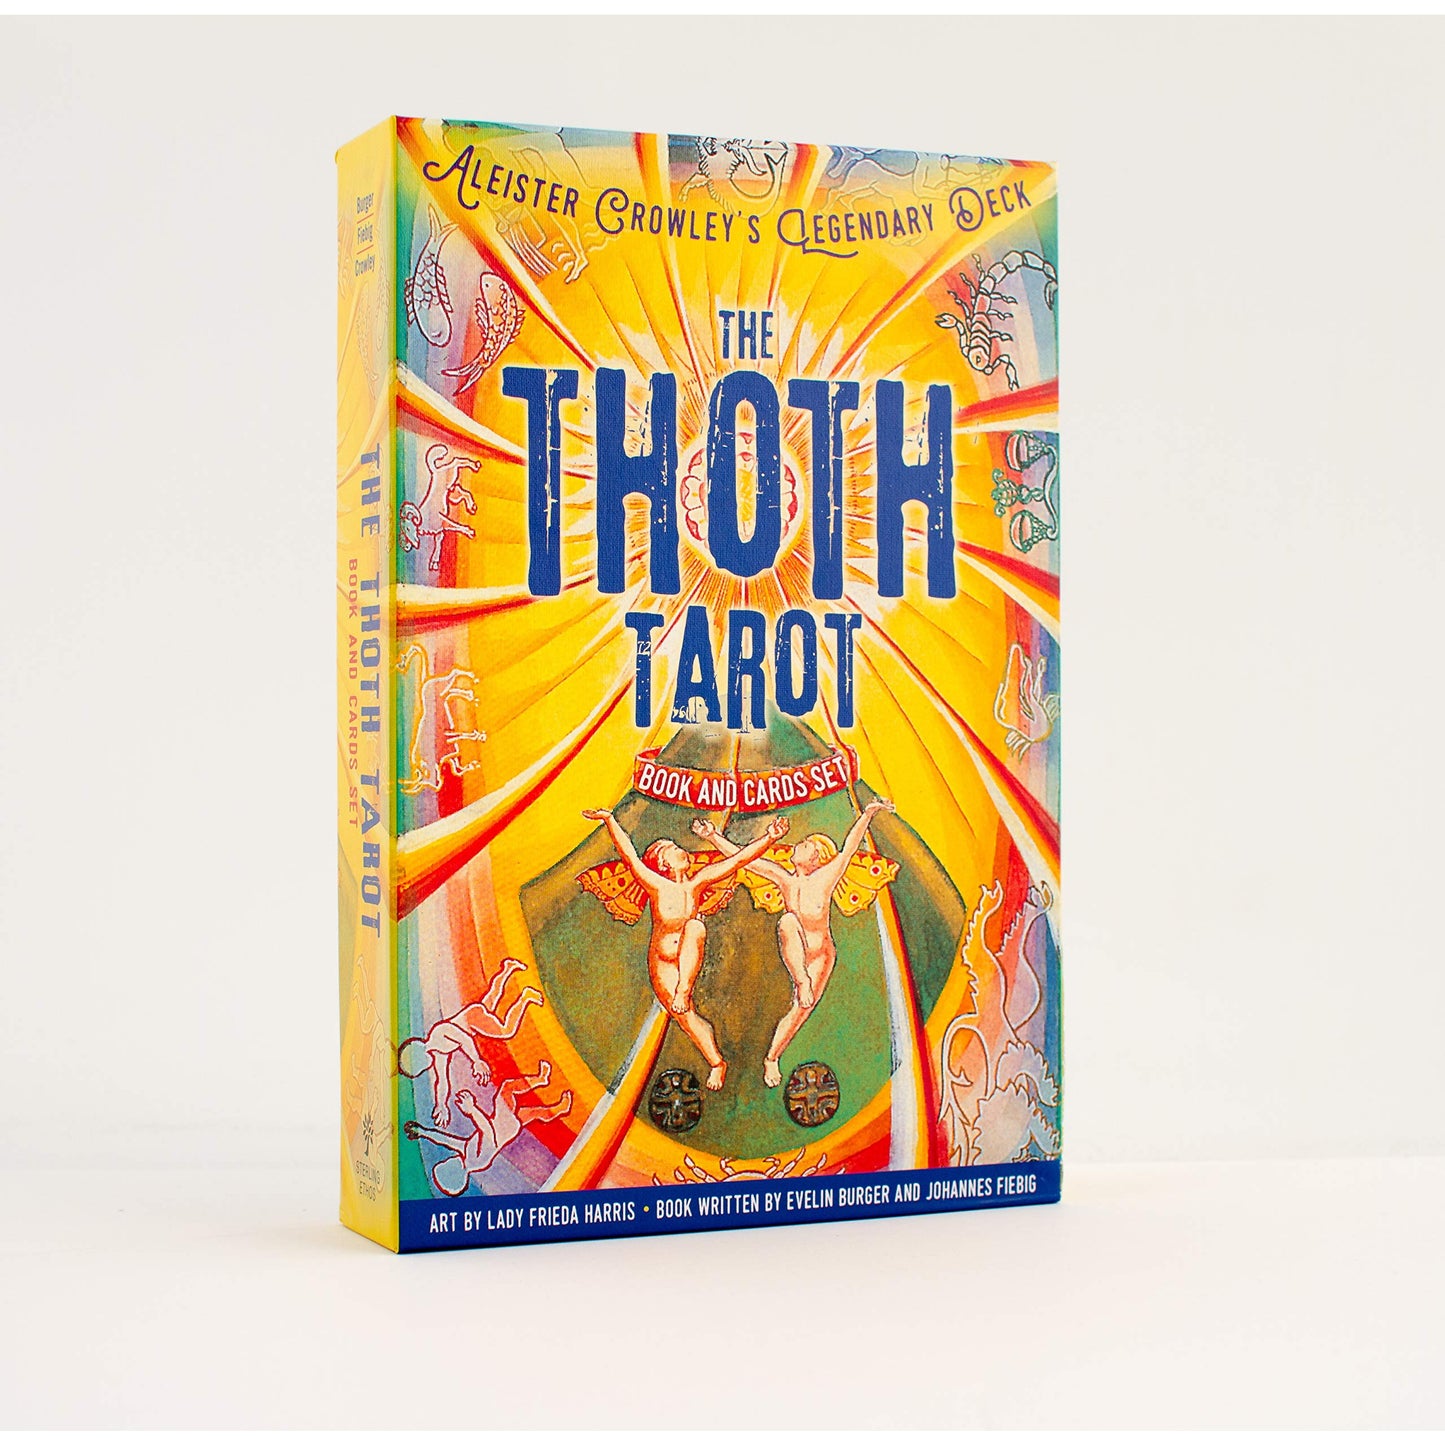 The Thoth Tarot Book and Cards Set: Aleister Crowley's Legendary Deck